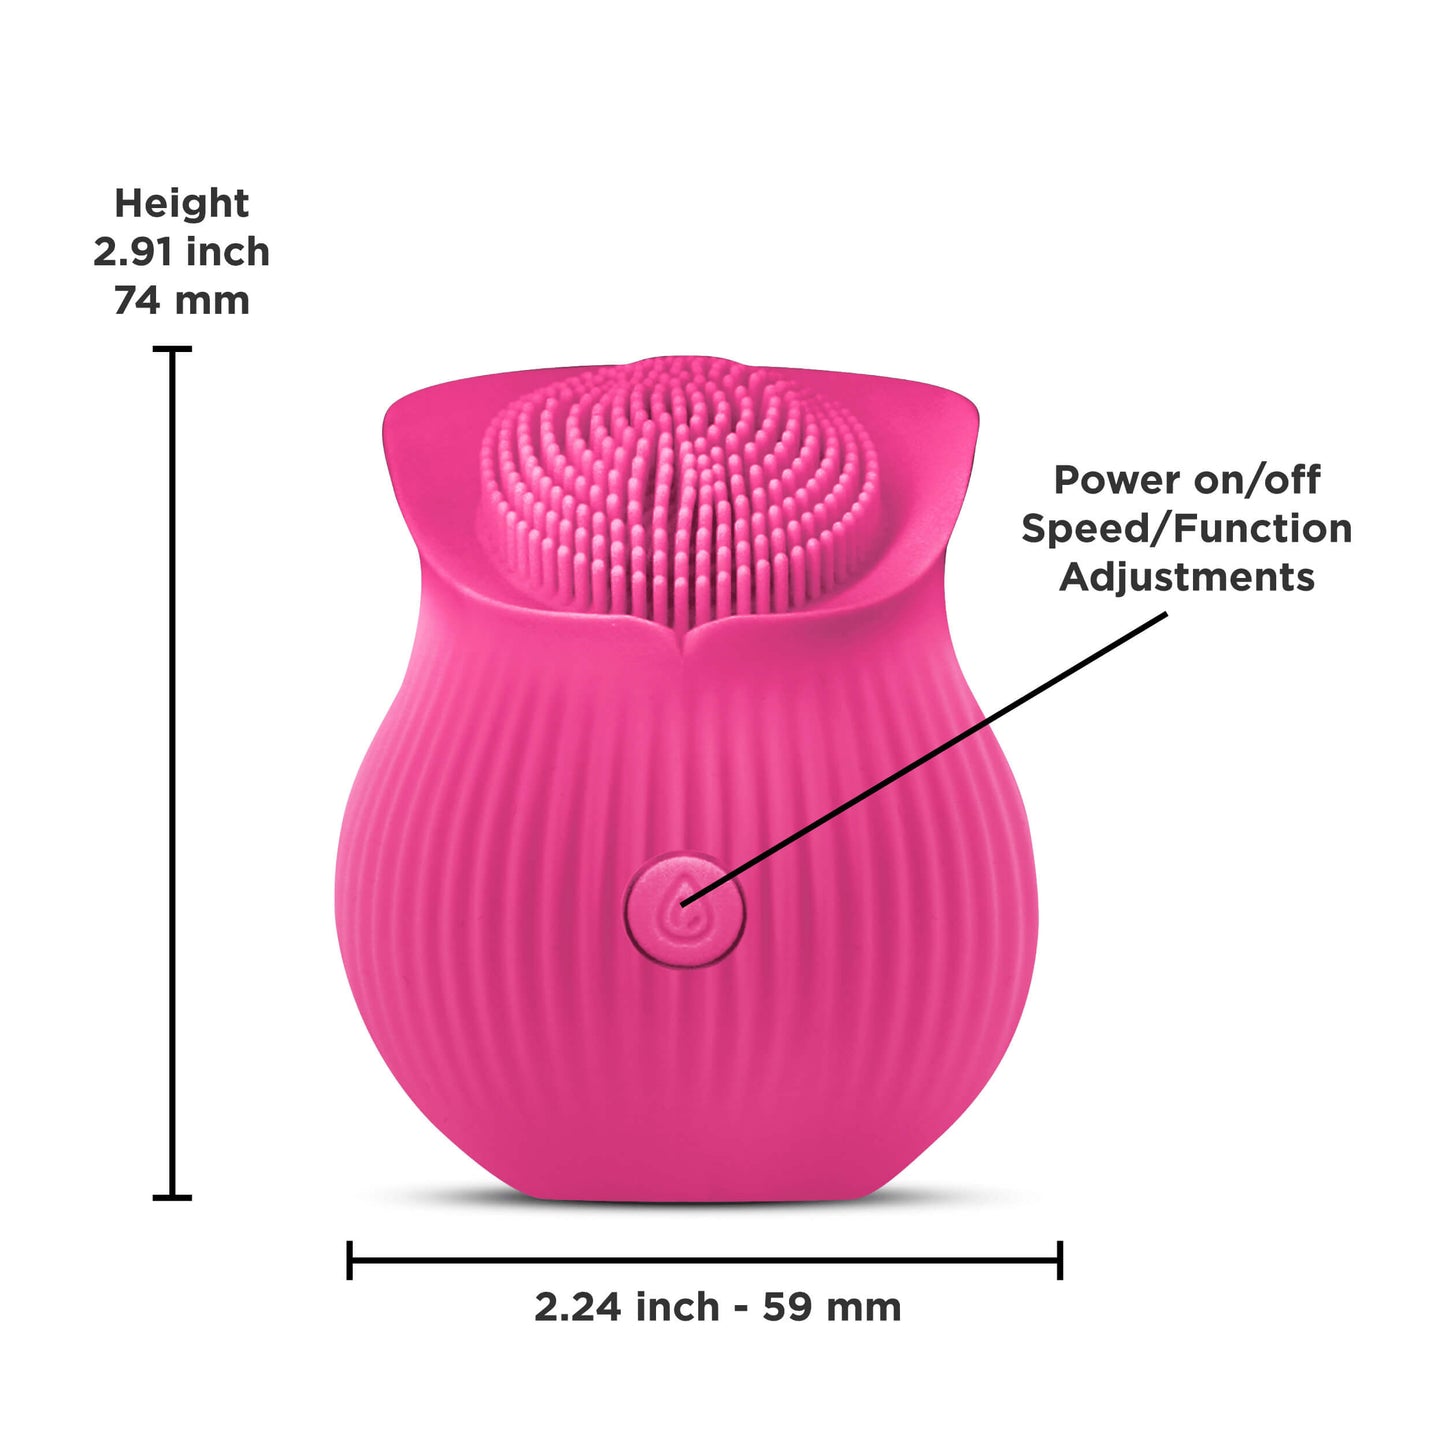 Inya The Bloom Vibrator in pink - by The Bigger O - an online sex toy shop. We ship to USA, Canada and the UK.